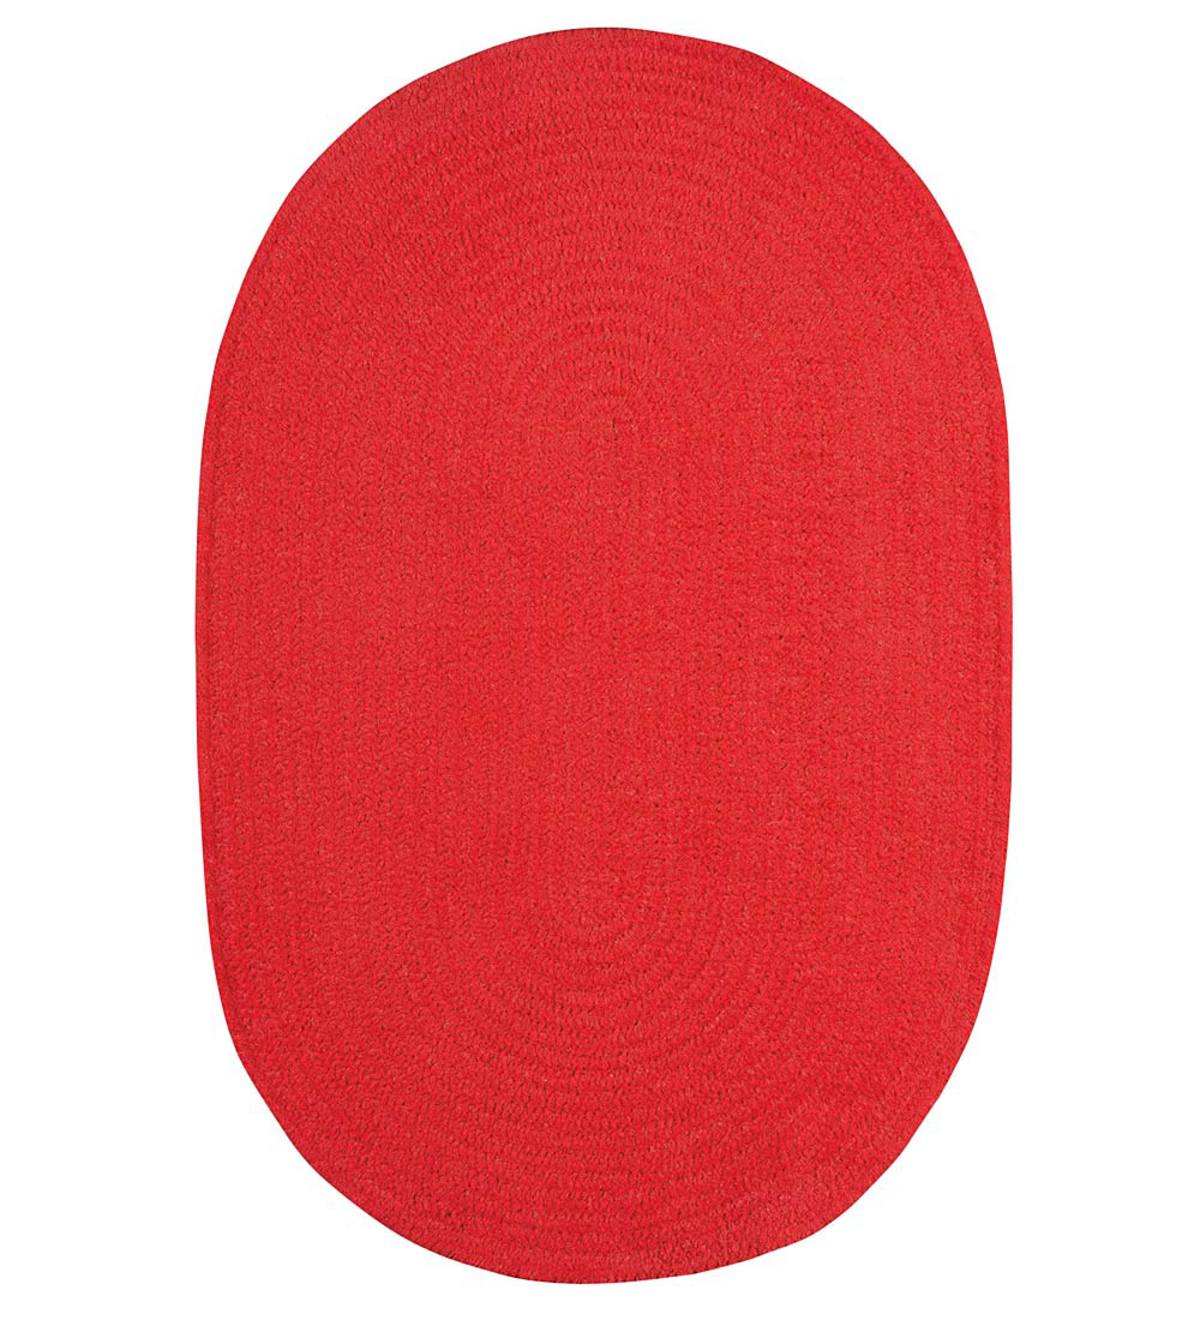 Chenille Oval Braided Area Rug, 8' x 11' - Flaming Red